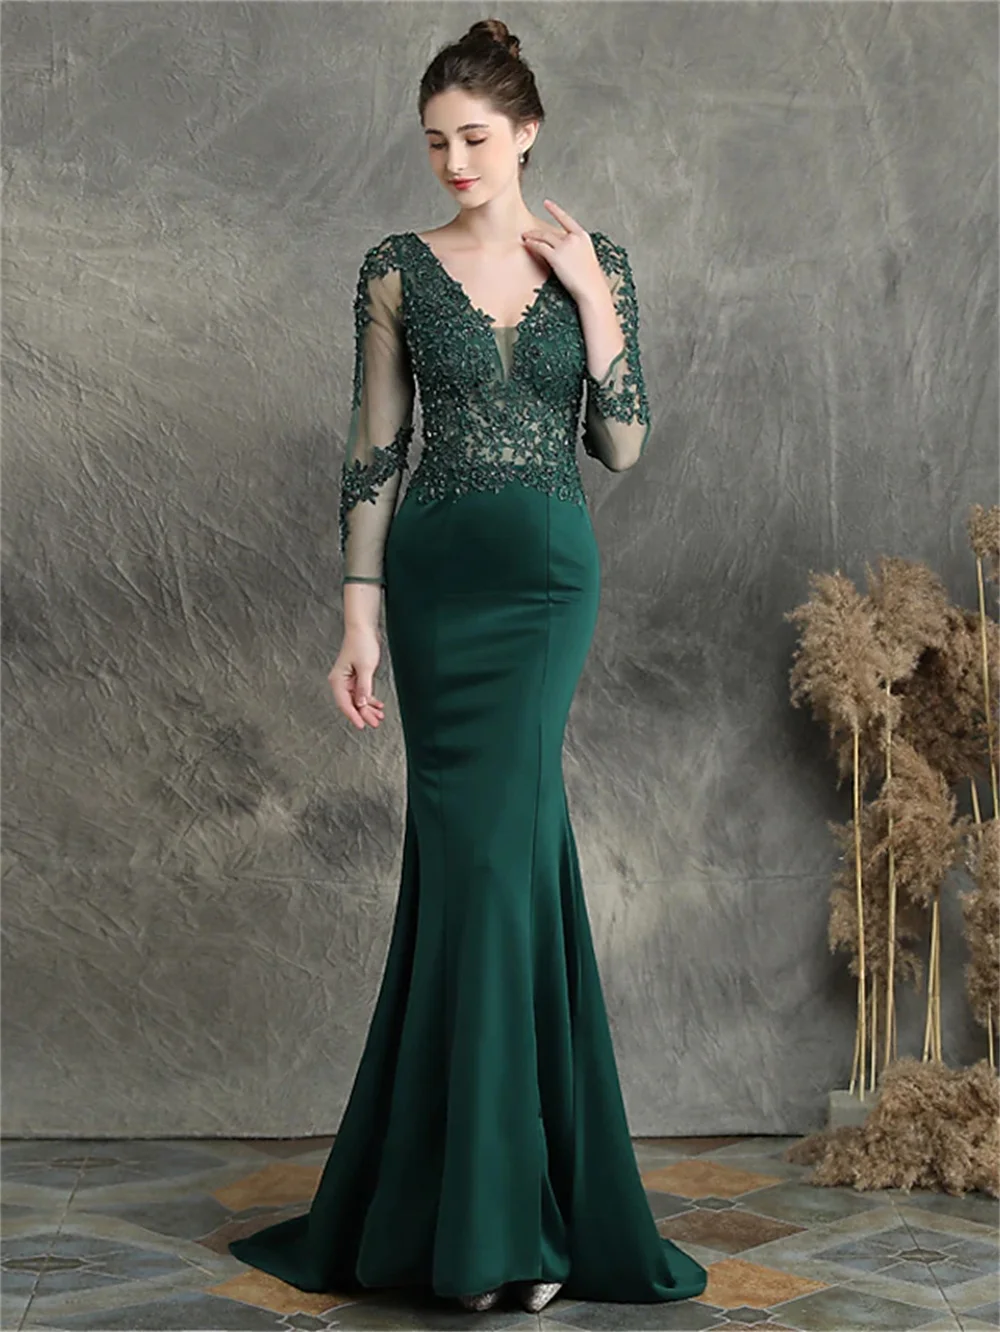 

Mermaid / Trumpet Prom Dresses Elegant Formal Sweep / Brush Train Long Sleeves V Neck Cotton Blend with Beading Appliques 2022